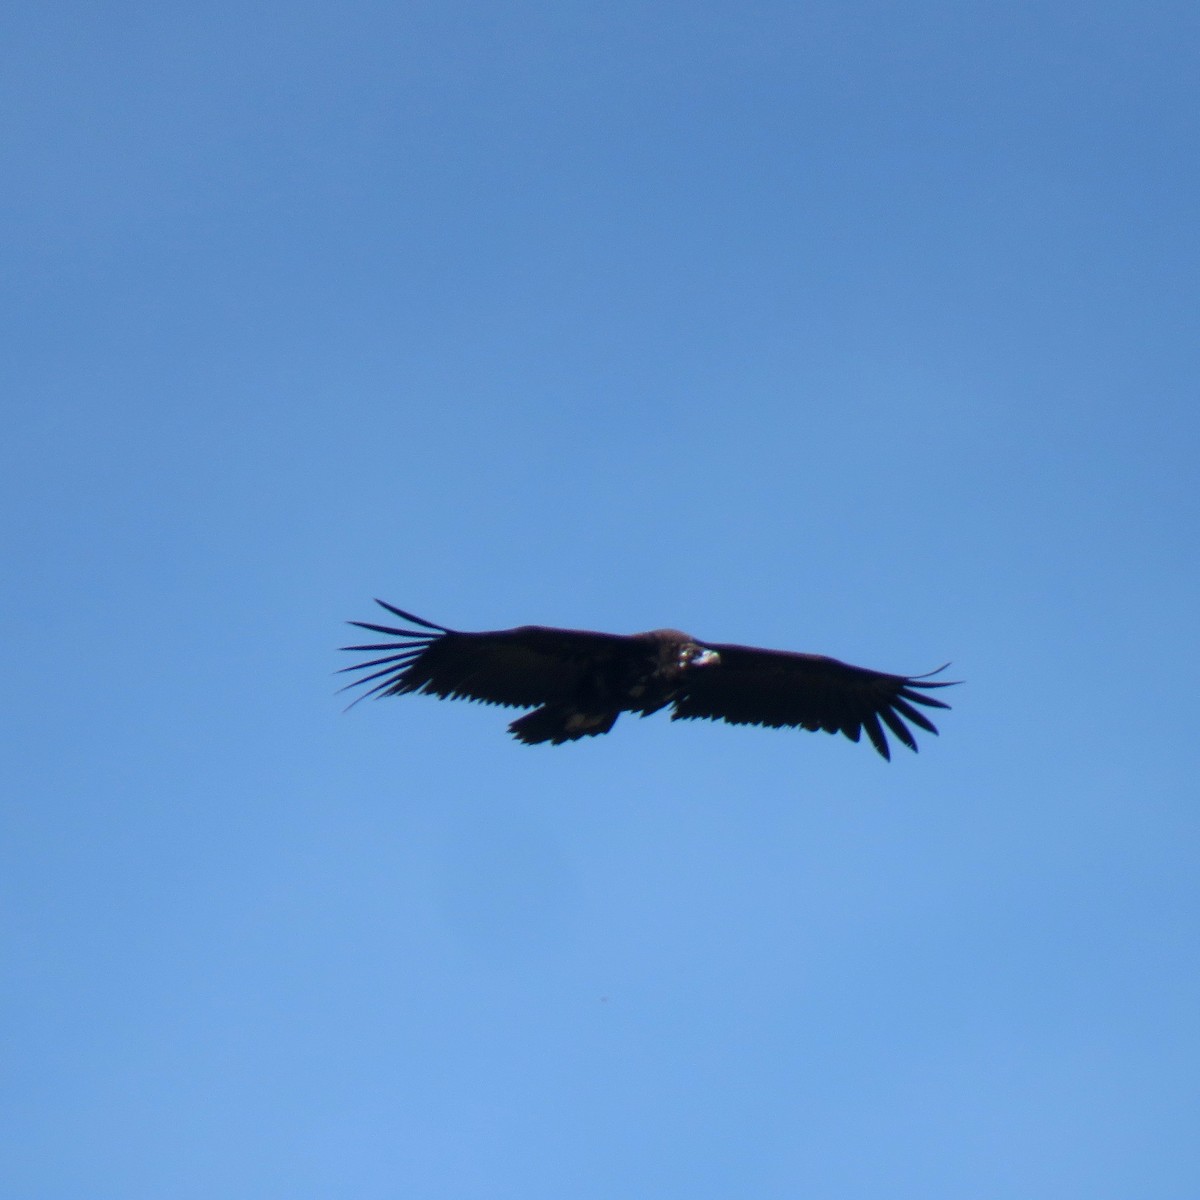 Cinereous Vulture - Pedros Martinian